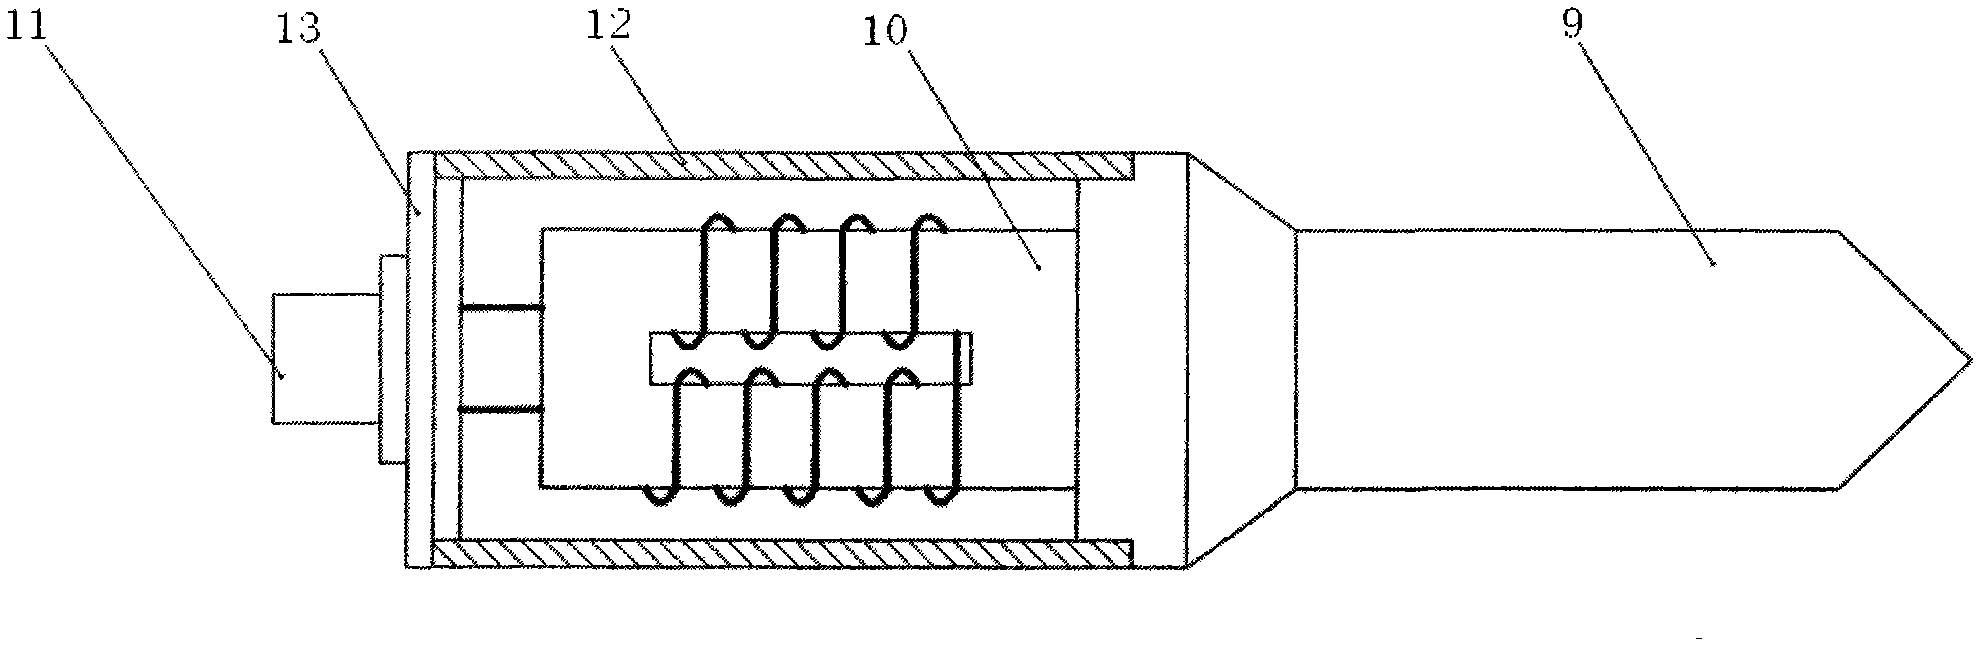 On-line ultrasound rotational flow descaling device for condenser